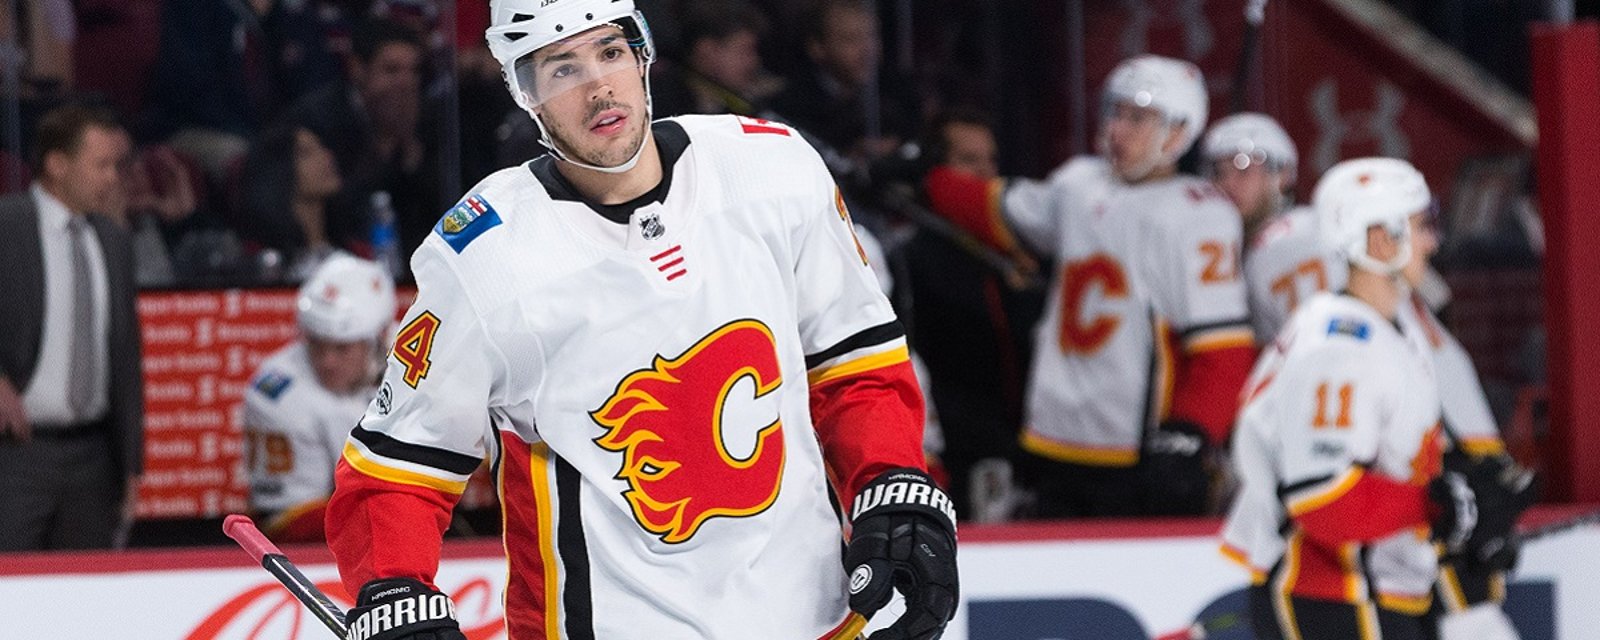 Hamonic shares heart wrenching details behind his absence. 